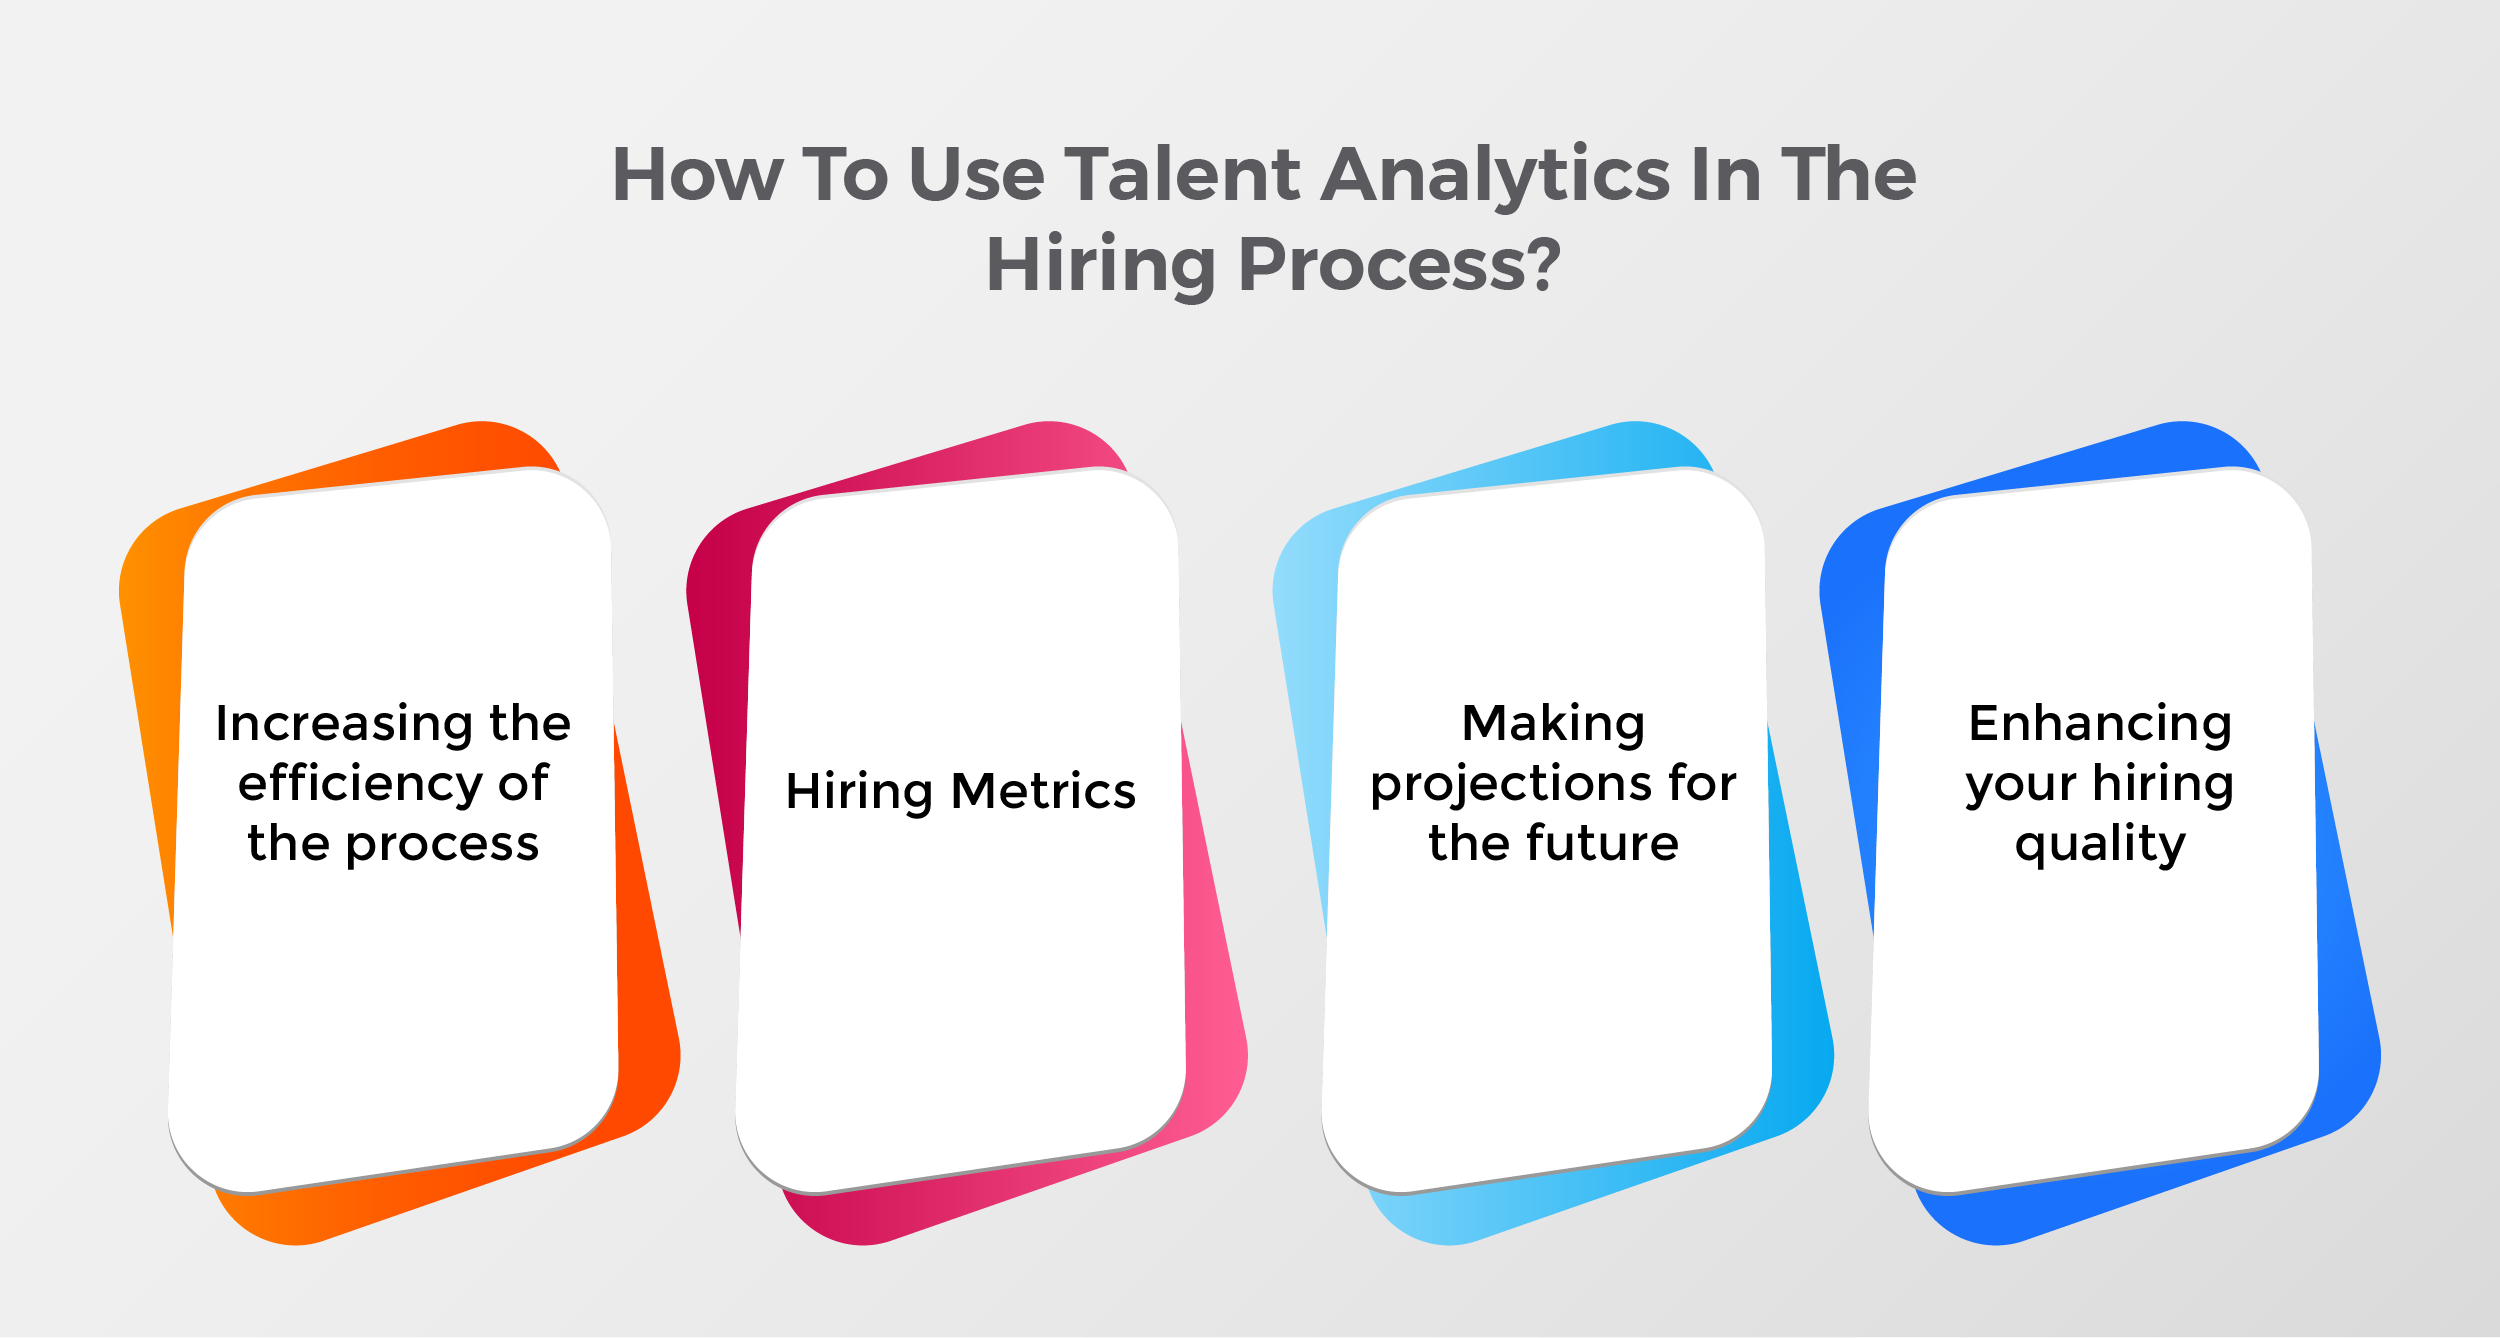 How To Use Talent Analytics In The Hiring Process?